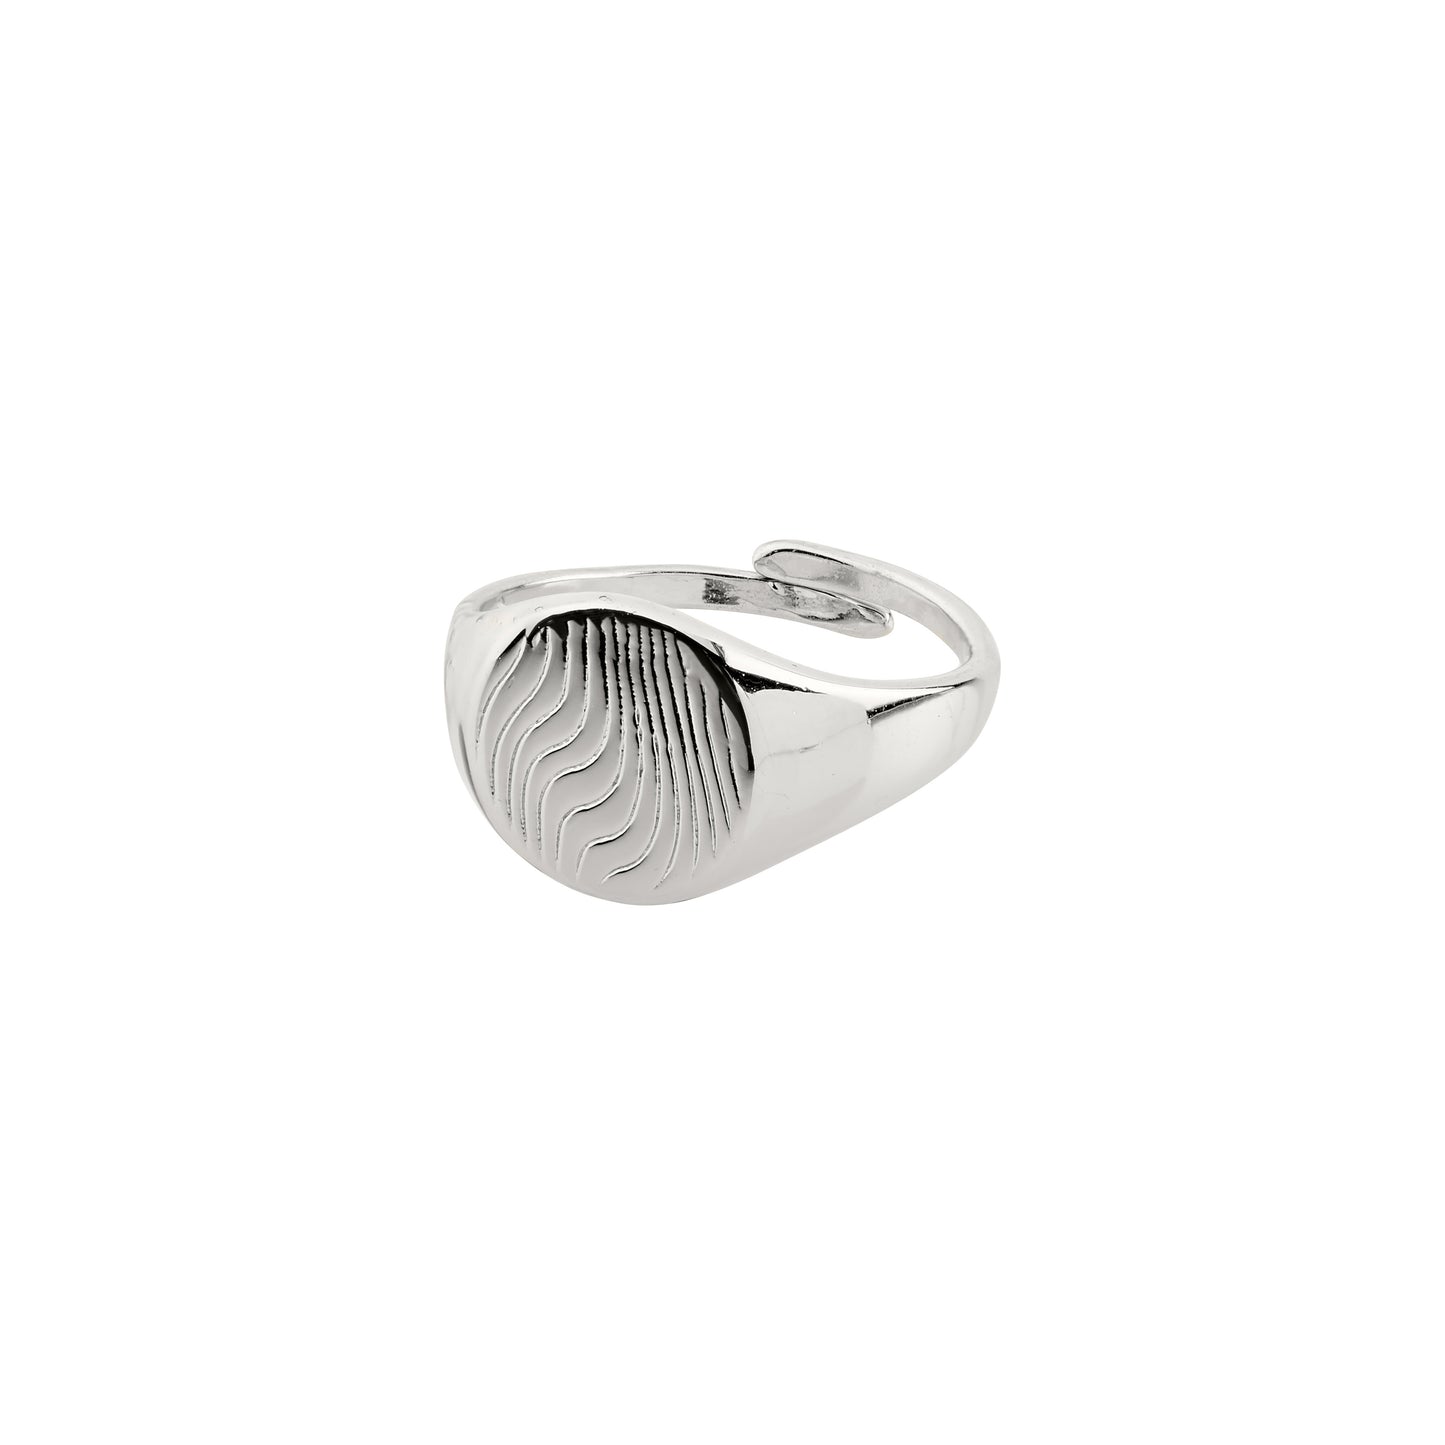 LOVE signet ring silver-plated